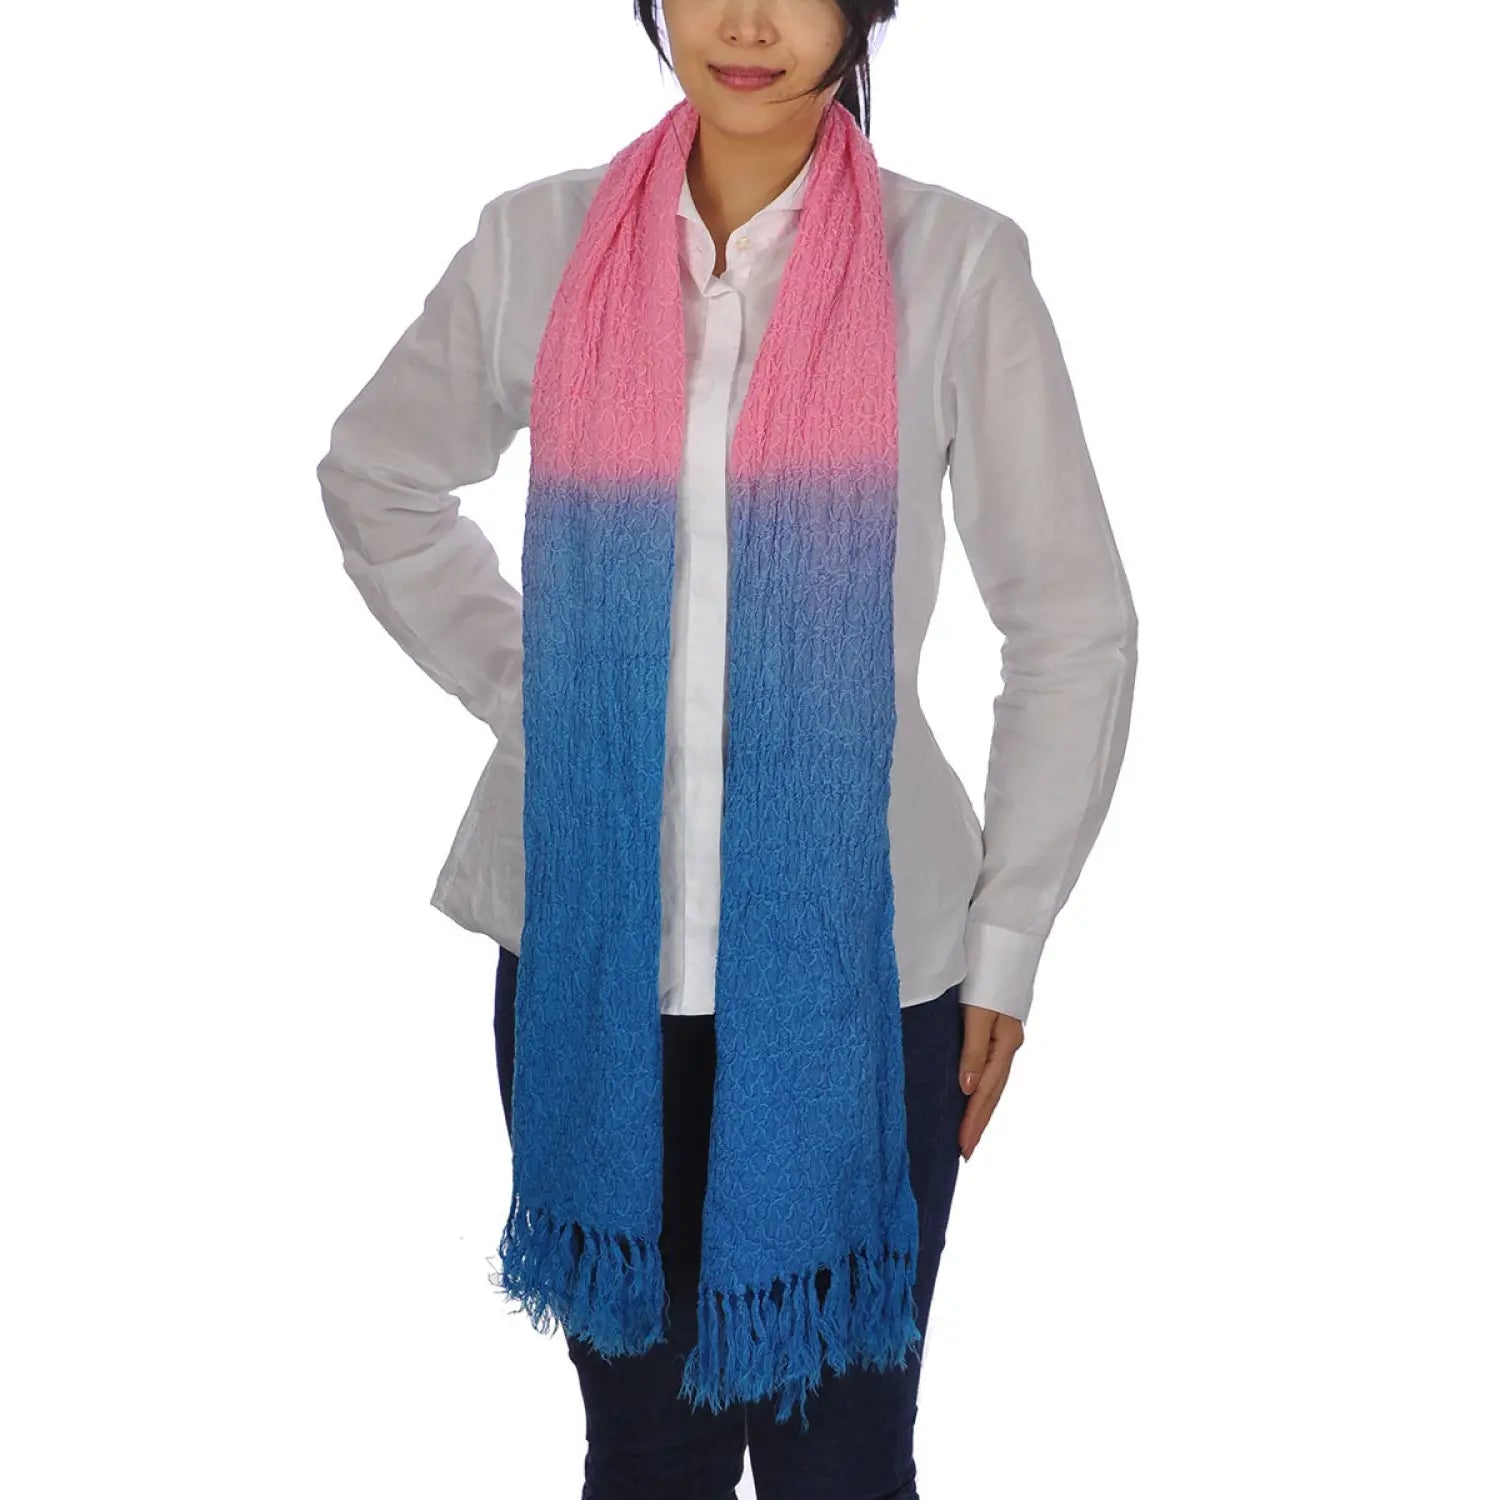 Sophisticated Embroidered Dip Dye Tasselled Soft Scarf - Woman wearing pink and blue scarf